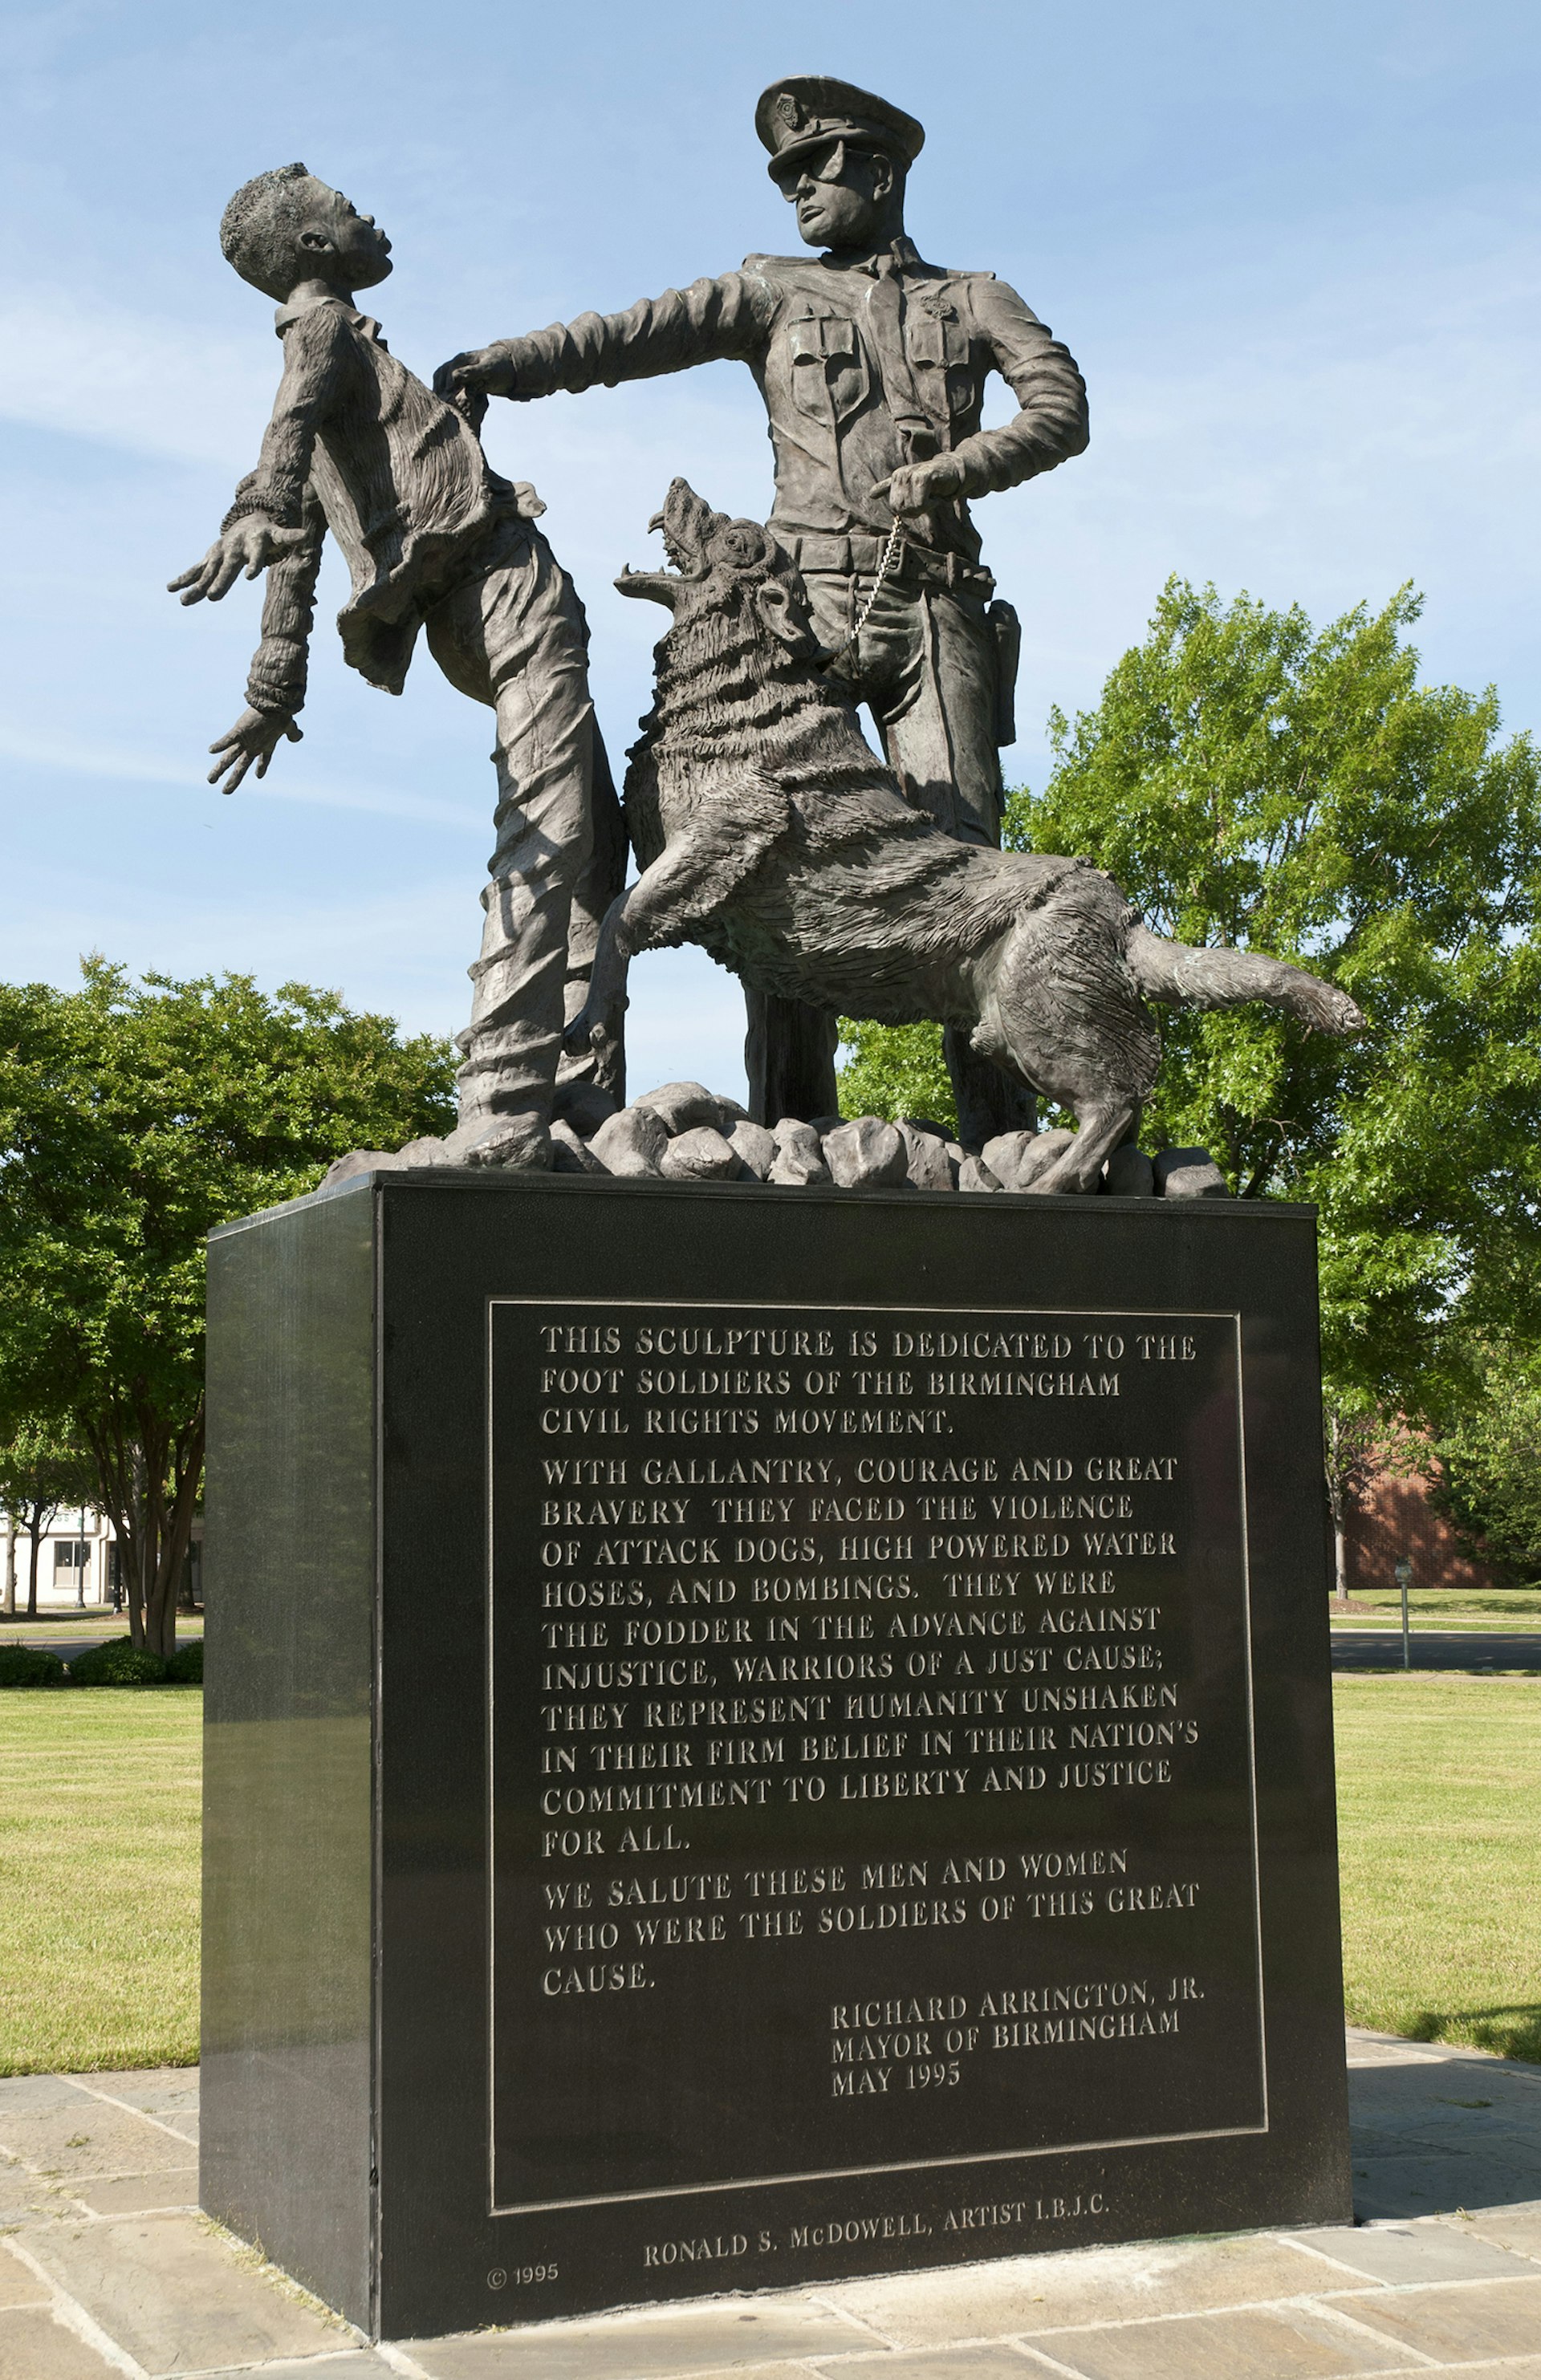 Kelly Ingram Park, with statues depicting the struggles encountered by demonstrators at this site of large scale demonstrations during the 1960s civil rights movement.